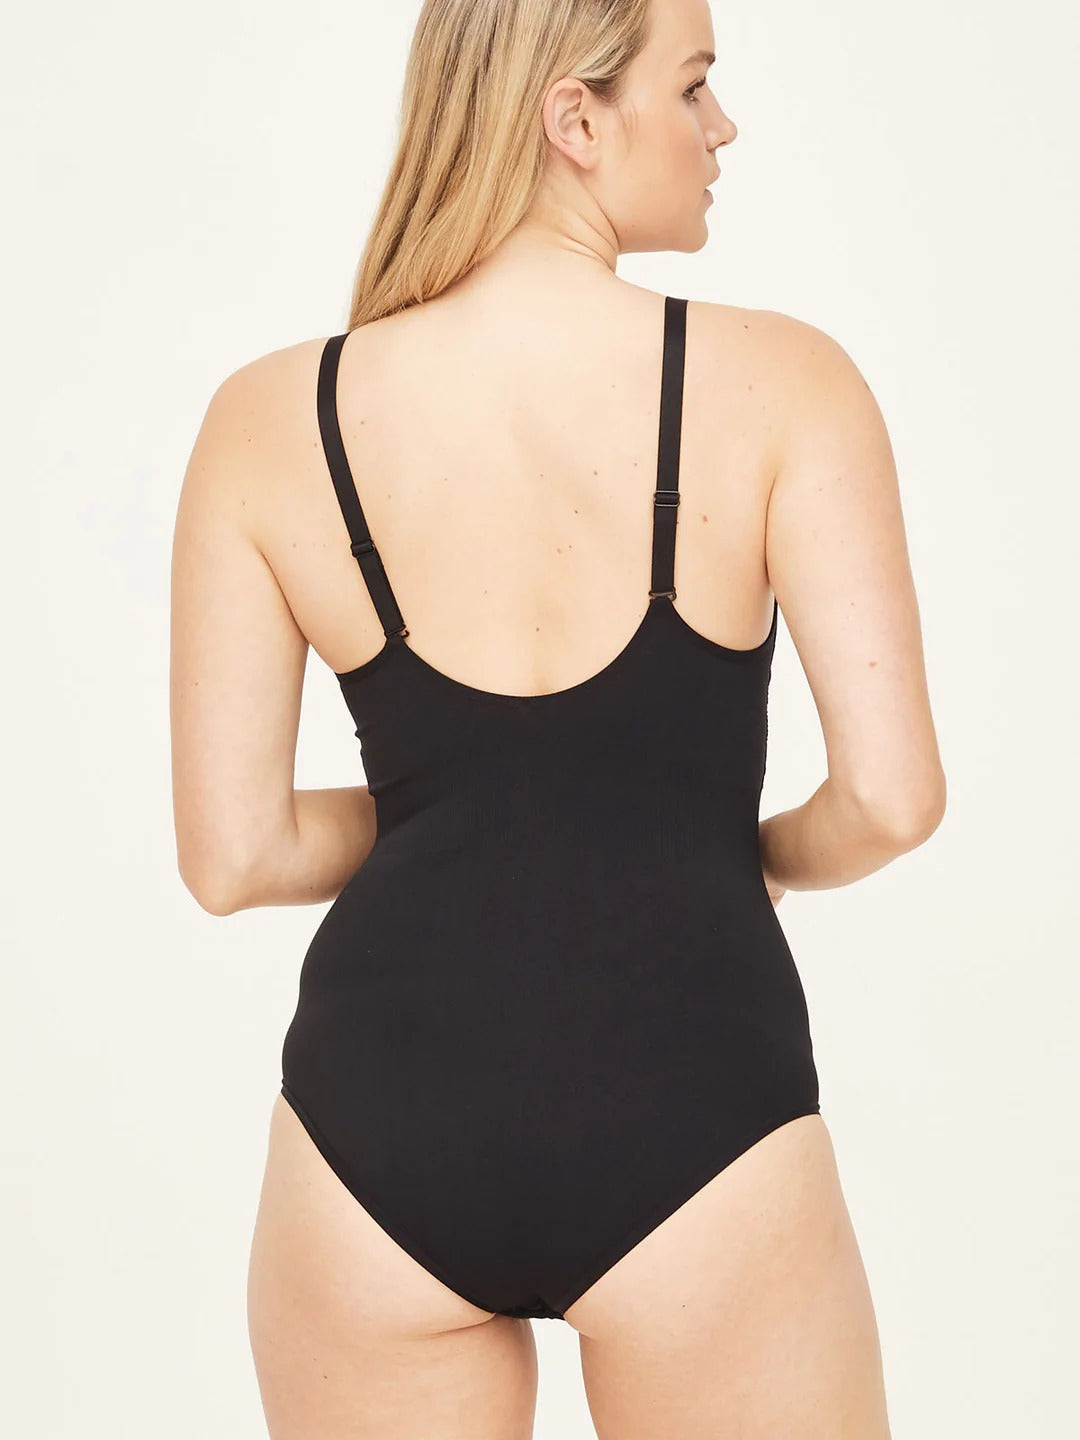 Thought Clothing - Recycled Nylon Seamless Body - Black